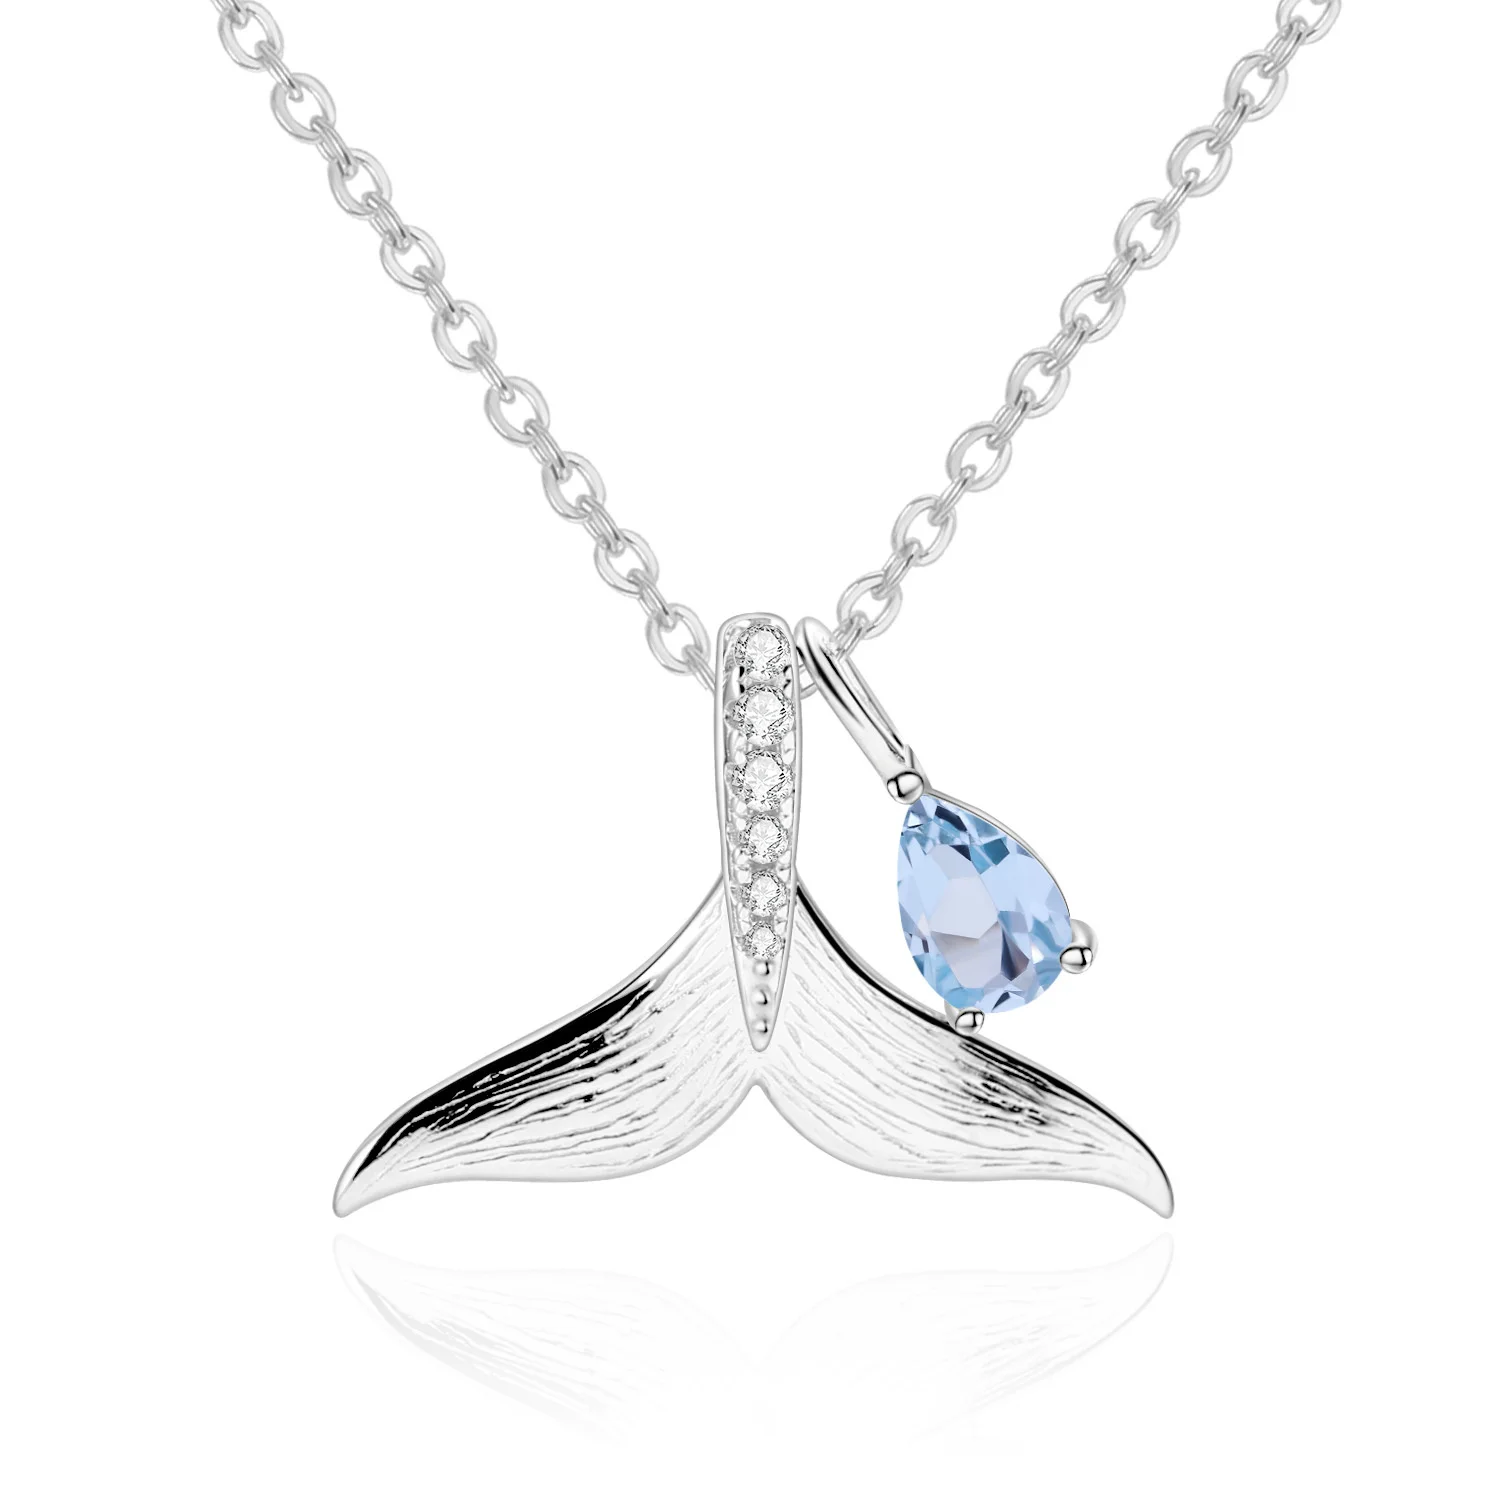 

brand genuine Luxury real jewels Designer Premium Charm Whale Tail Design s925 Sterling Silver Natural Topaz Necklace Pendant hi